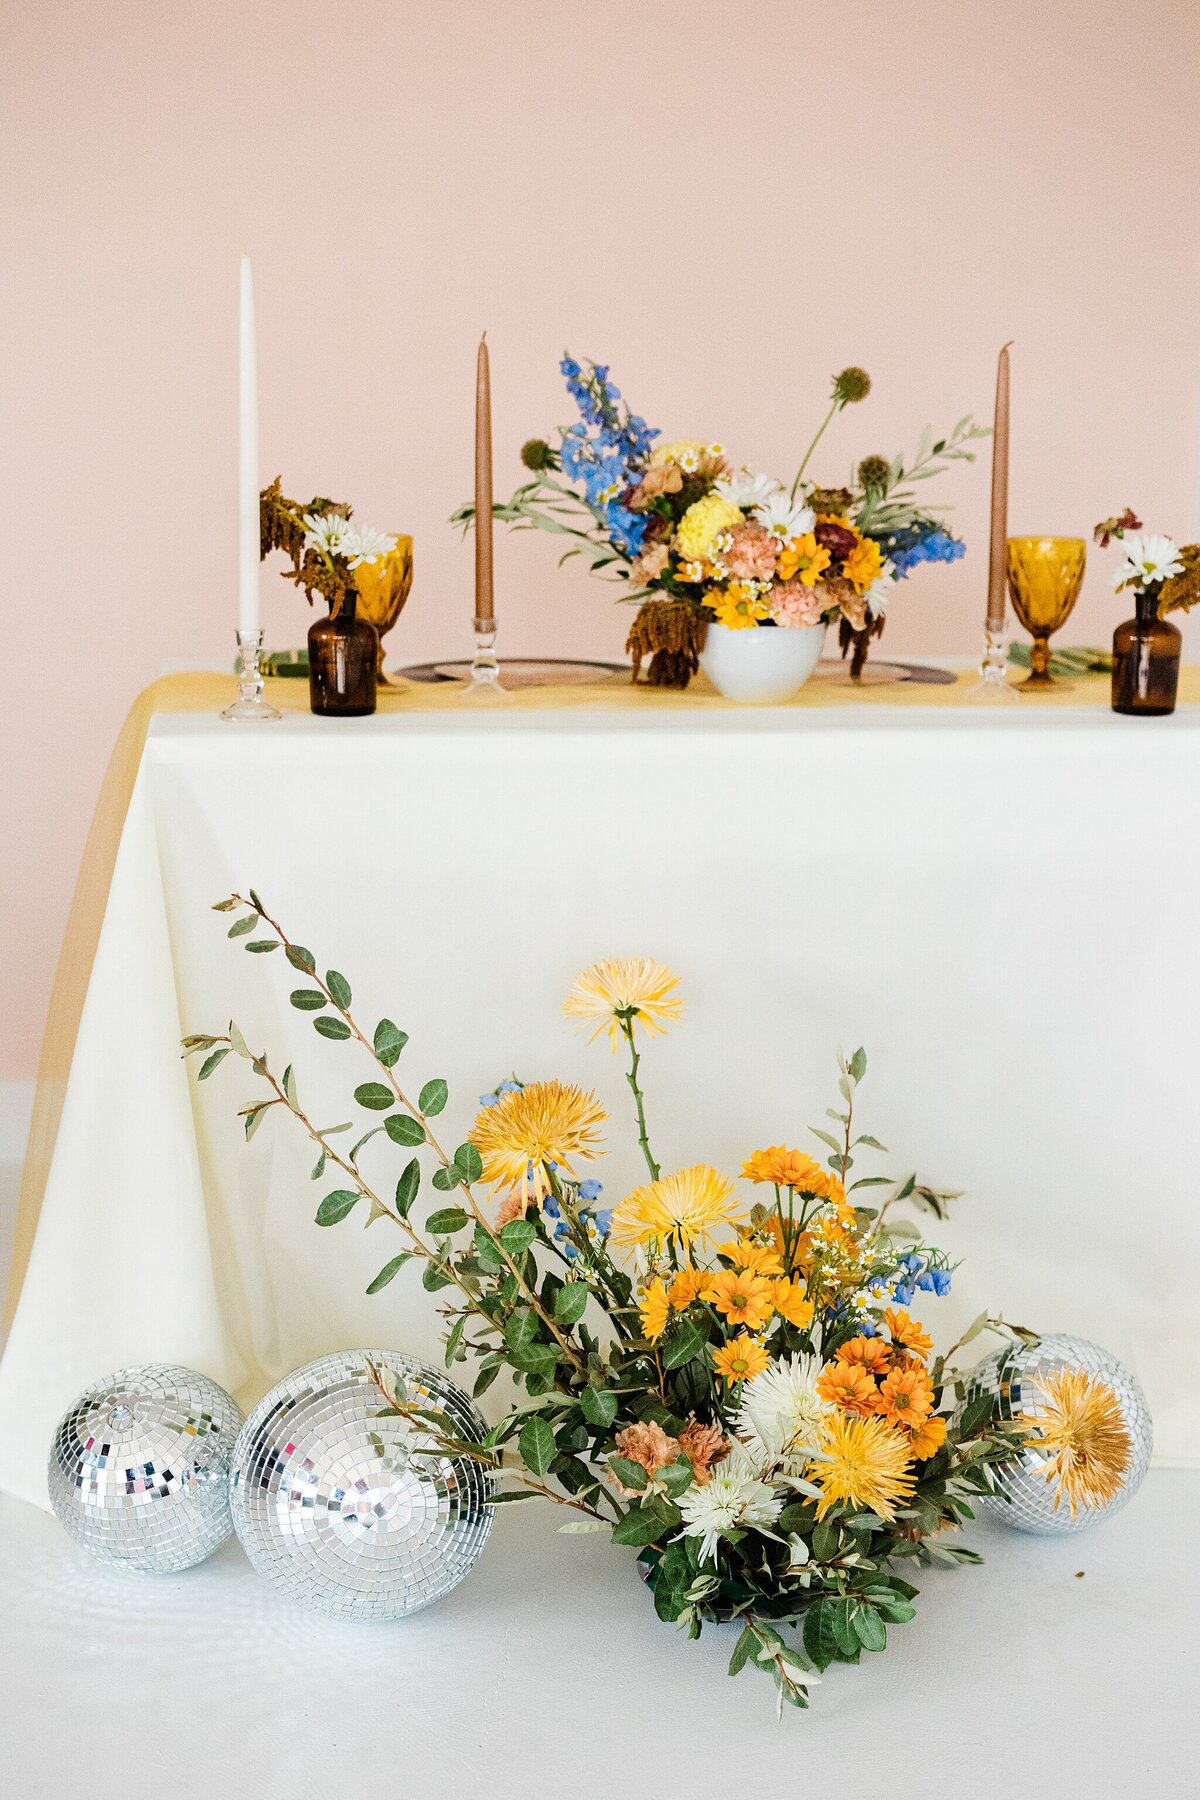 Detail shot of a reception table at a wedding in Dallas, Texas. The table has a long, white table cloth, place settings, many candles, and a bouquet of colorful flowers as the centerpiece. In front of the table is a similar but larger floral arrangement and multiple disco balls of varying sizes.